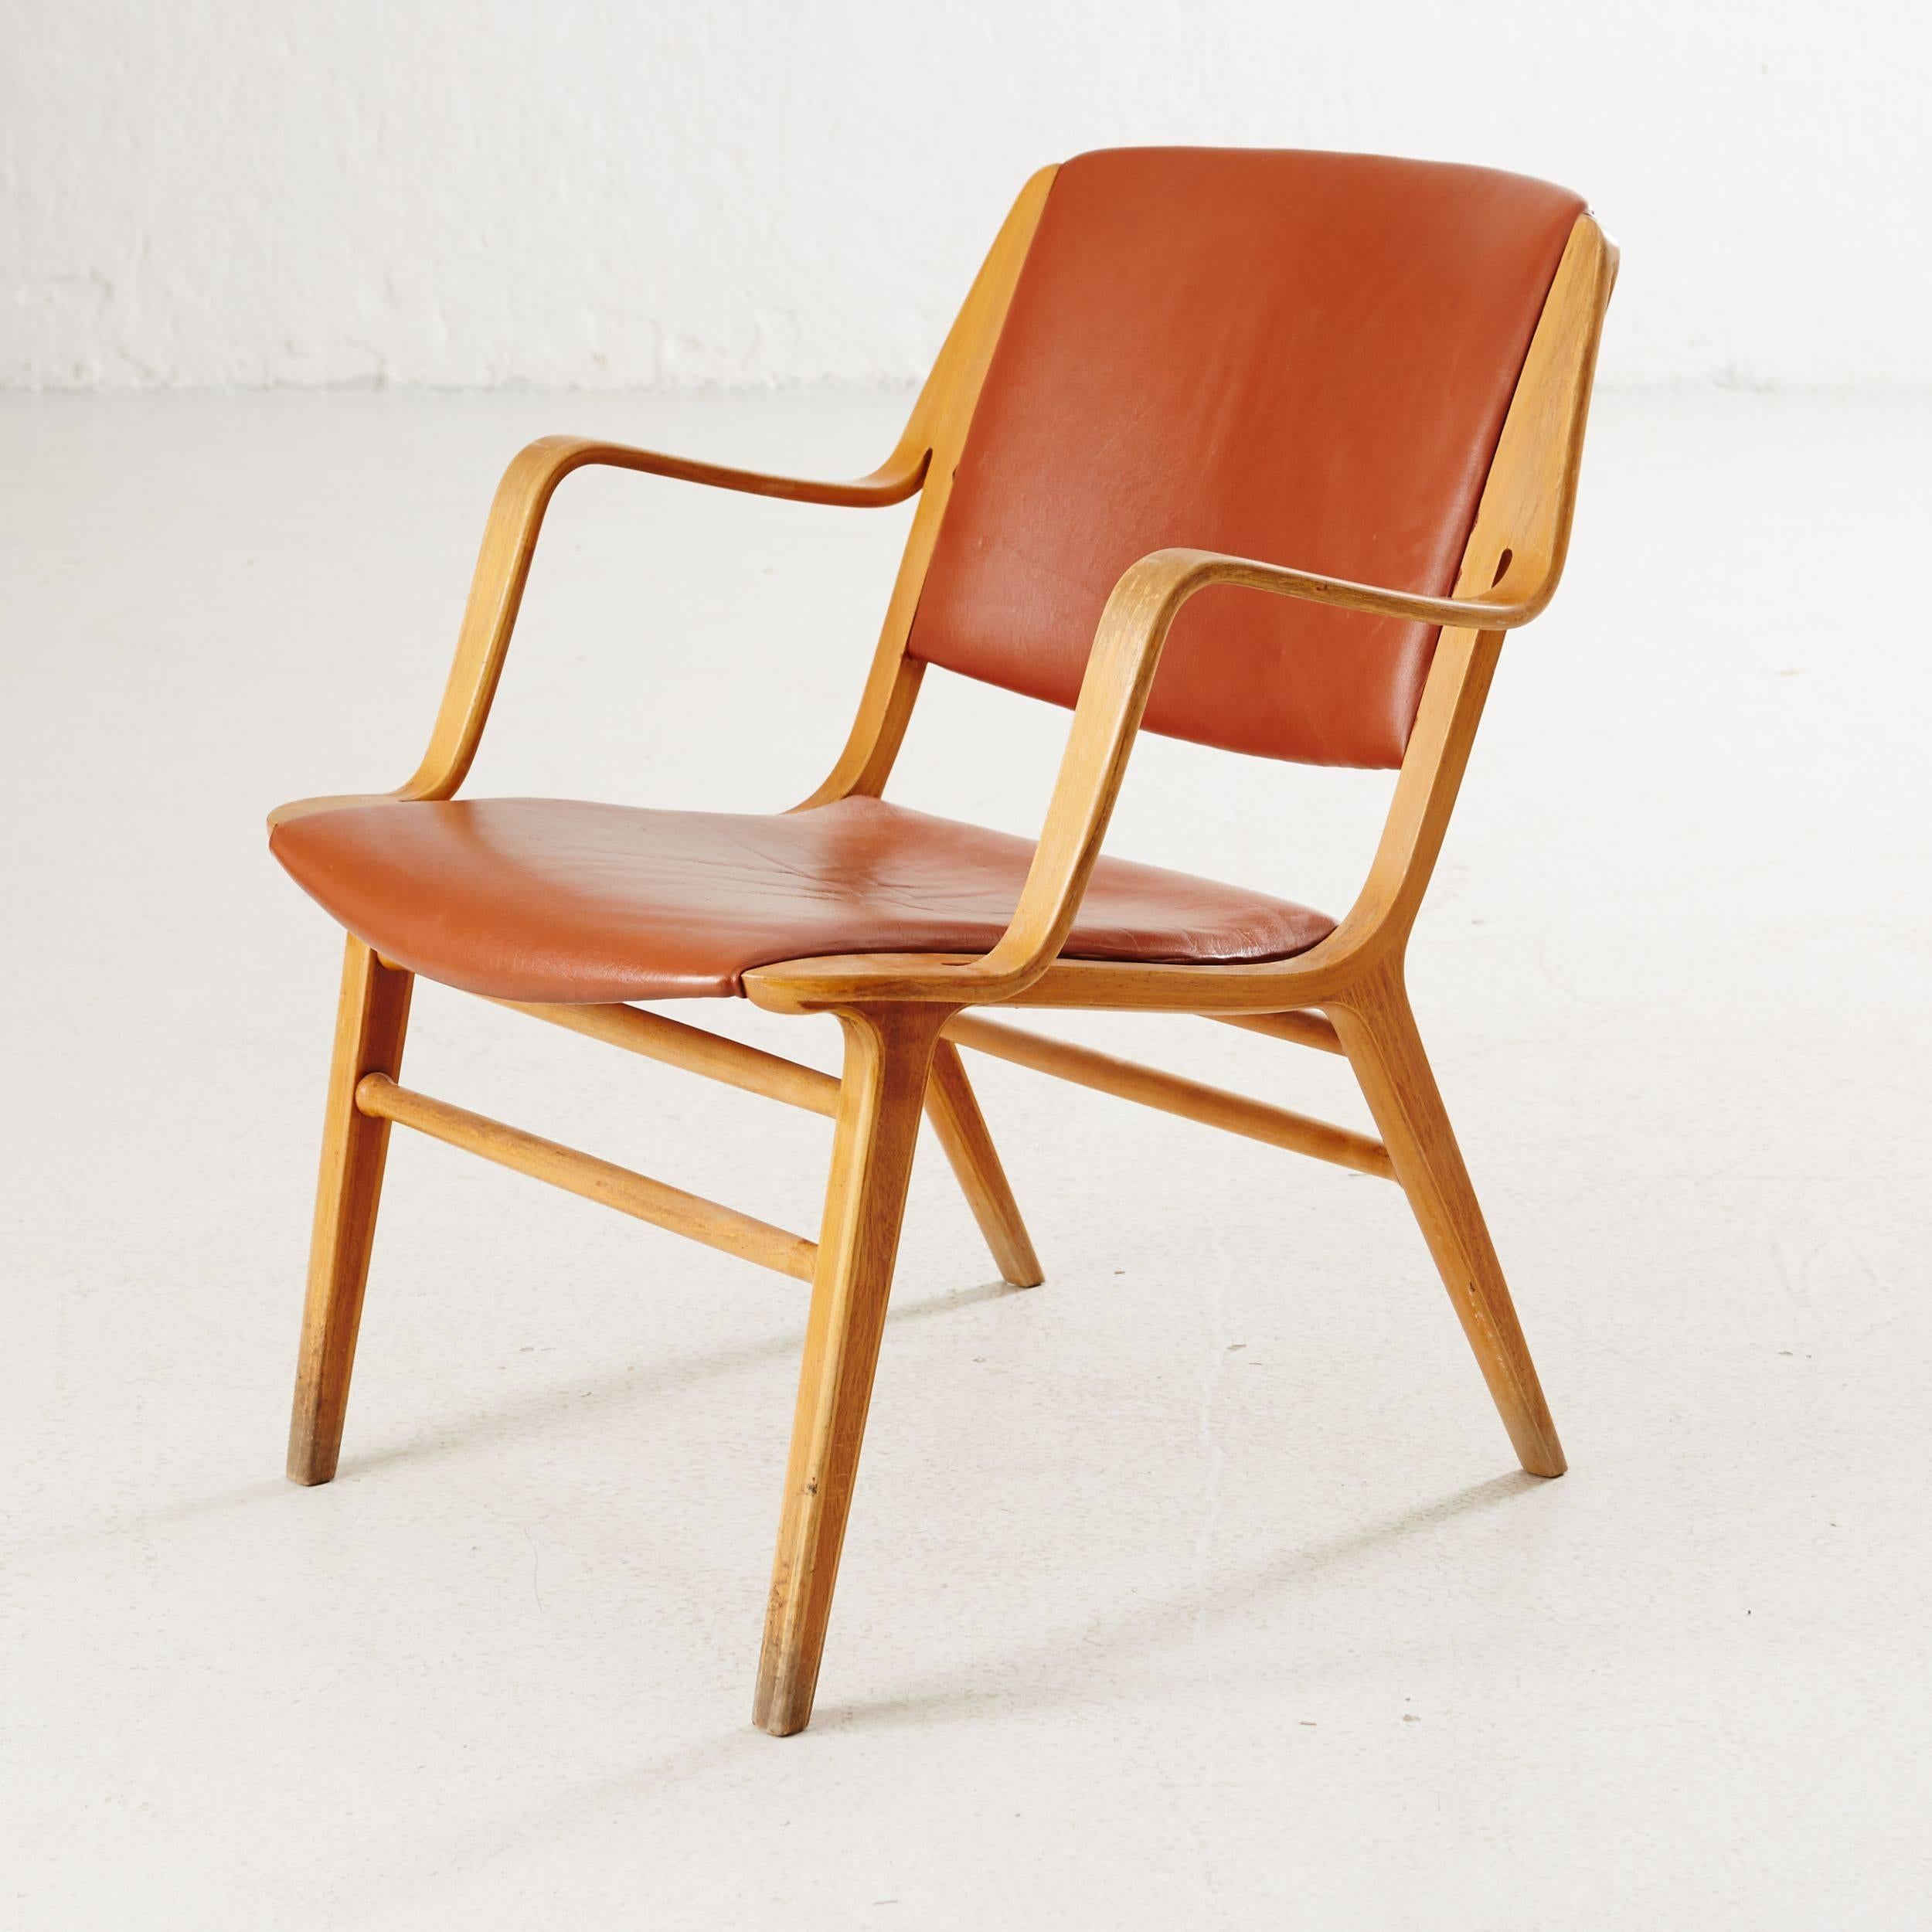 Set of four Danish Ax easy Chairs. 
Armchairs model no. 6020 designed in 1947 by Peter Hvidt and Orla Mølgaard-Nielsen for Fritz-Hansen. Frames made of laminated teak and beech and upholstered in original leather.